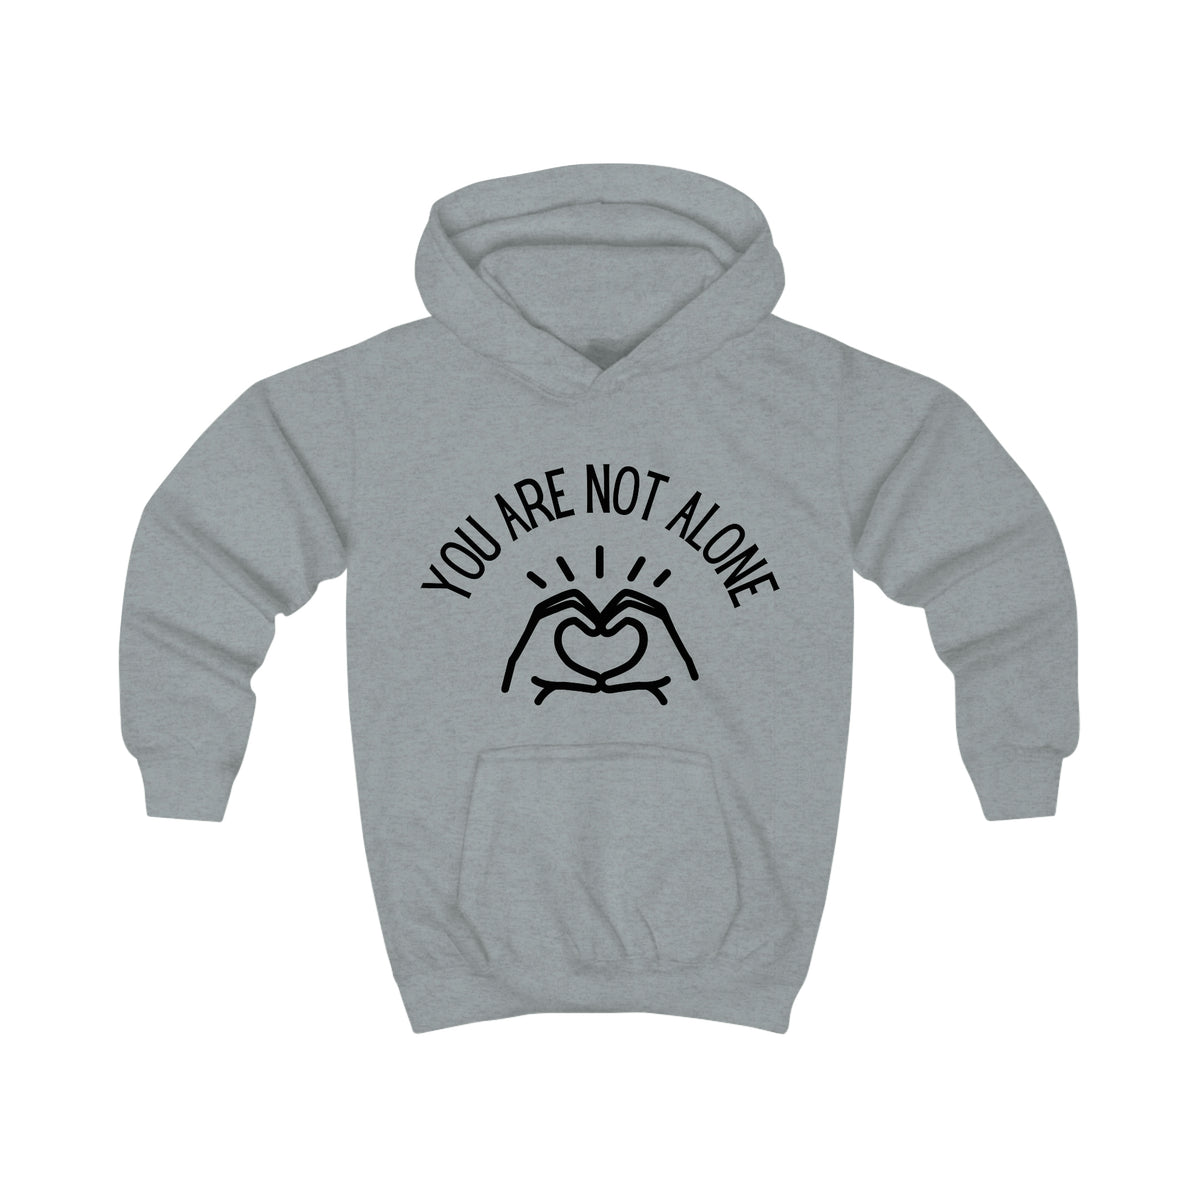 Kids You Are Not Alone Hoodie - Fck the Stigma